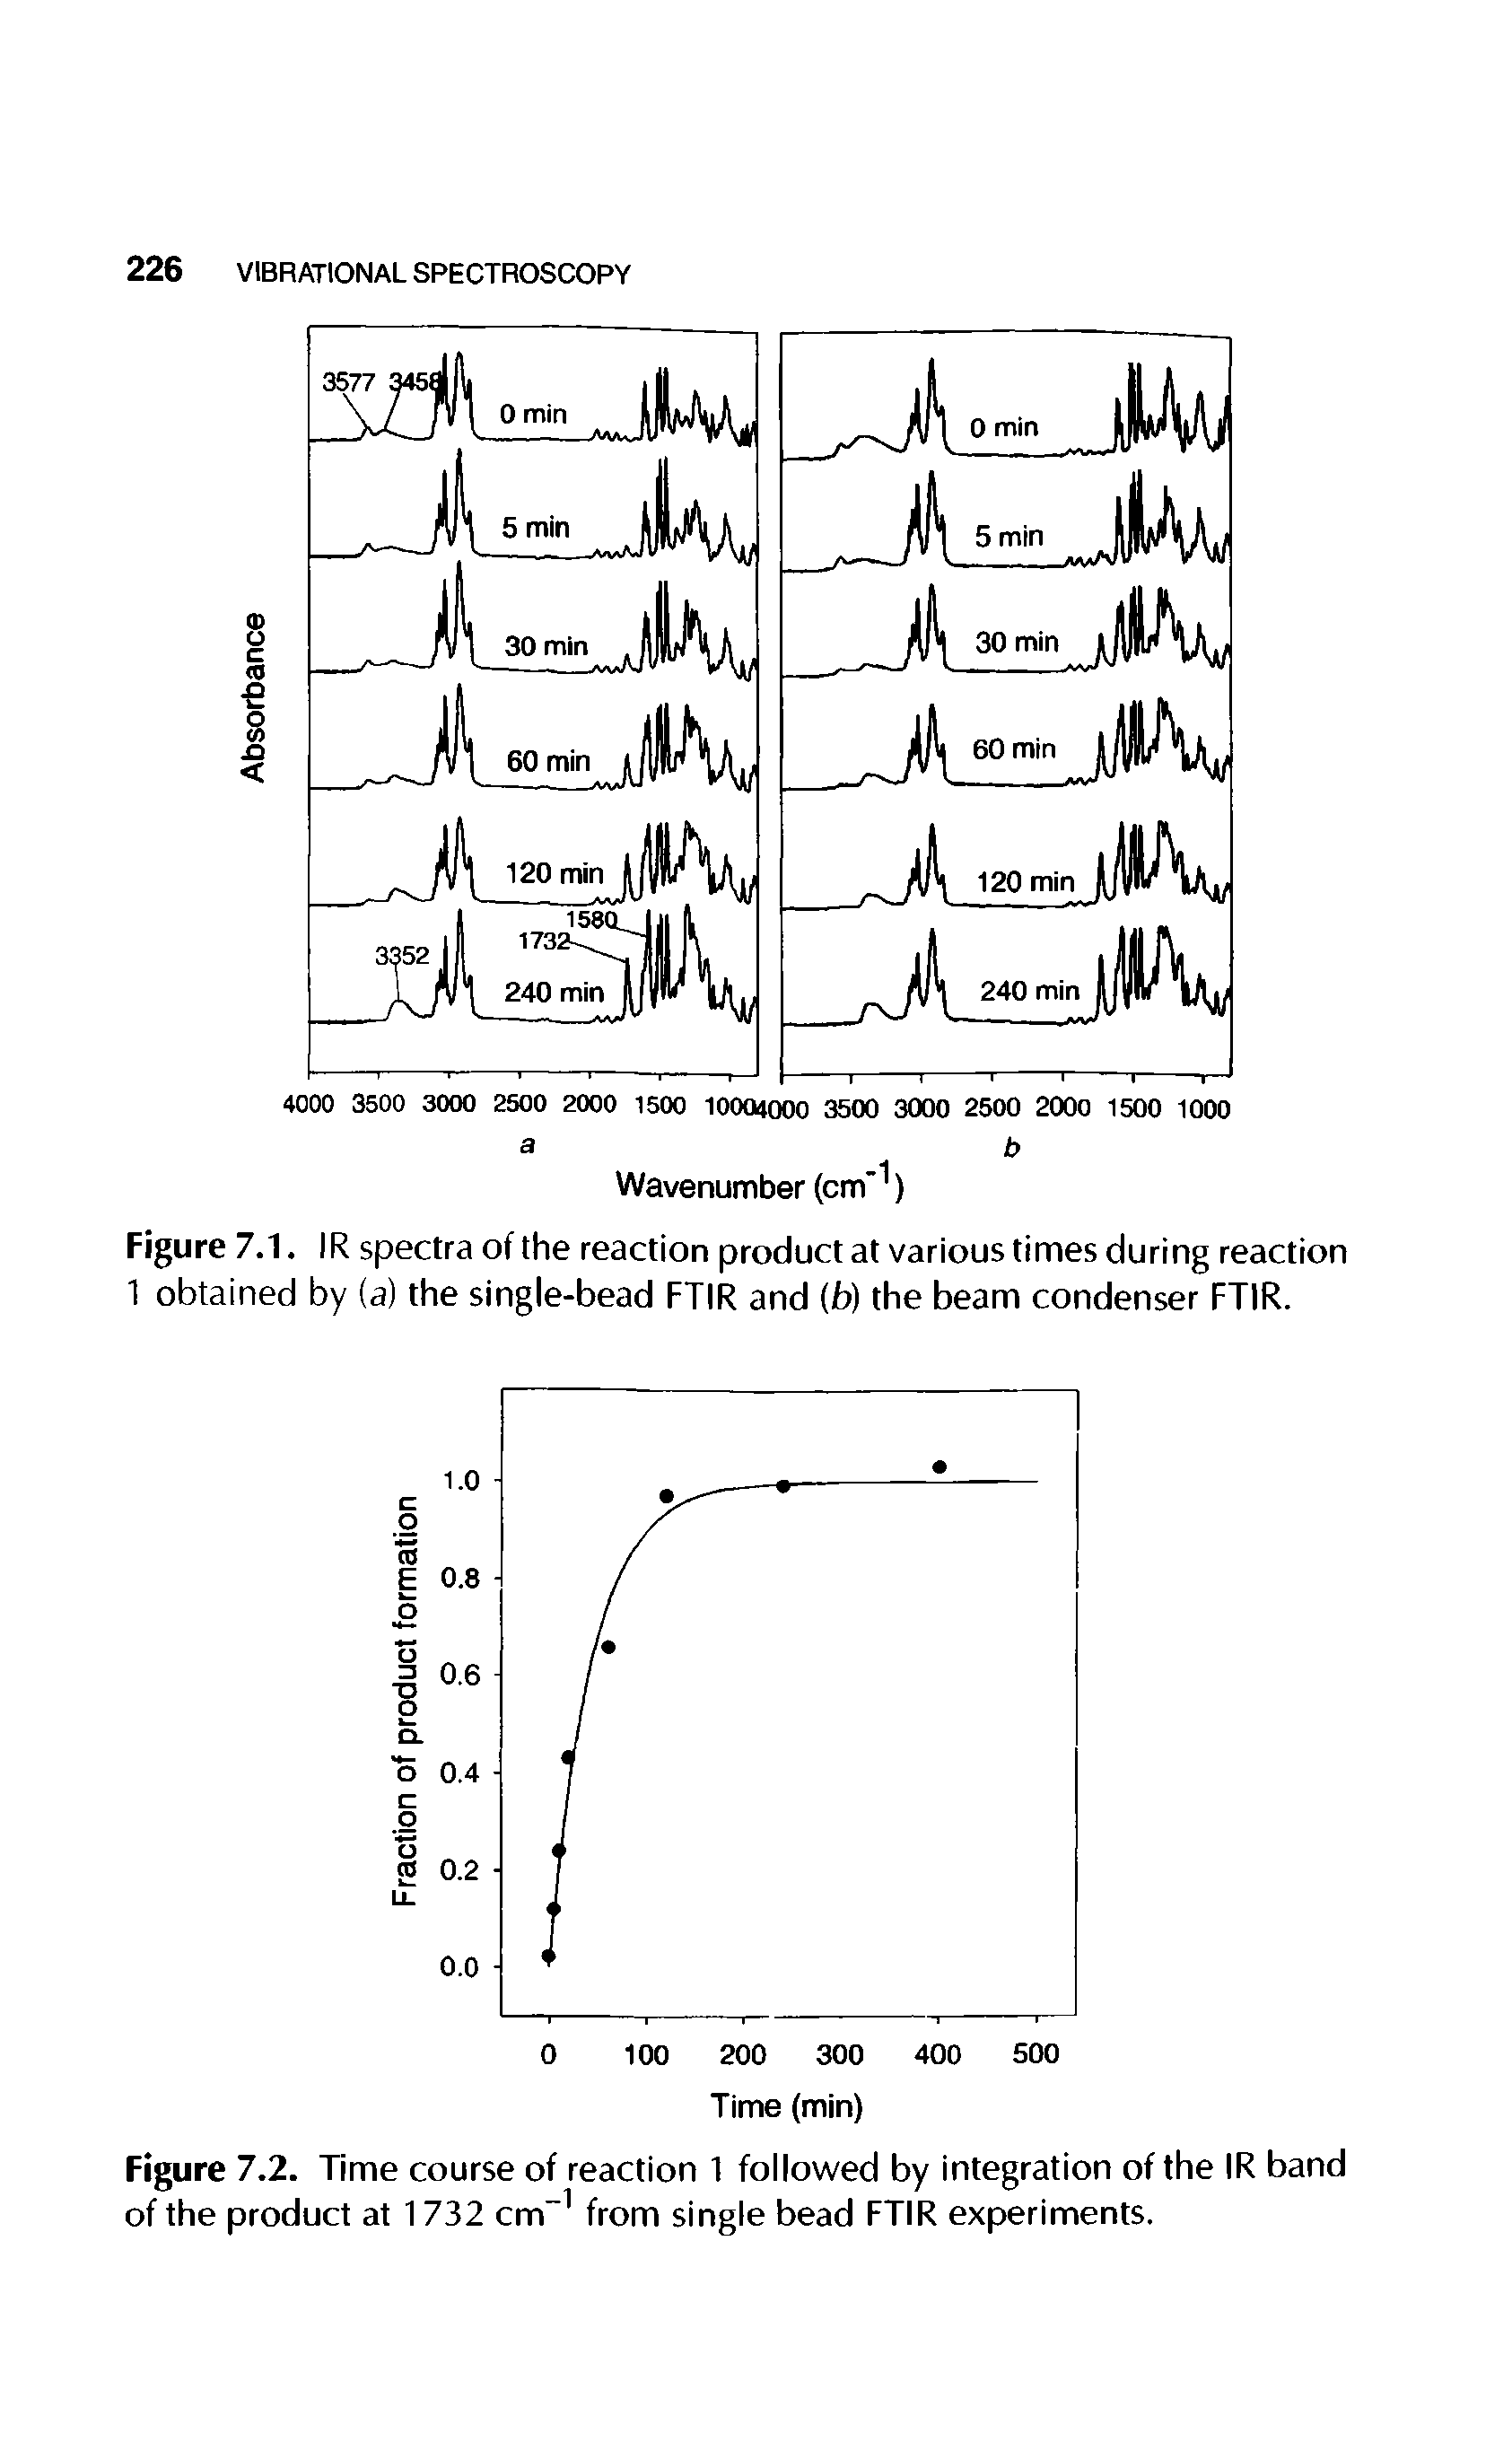 Figure 7.1. IR spectra of the reaction product at various times during reaction 1 obtained by (a) the single-bead FTIR and (b) the beam condenser FTIR.